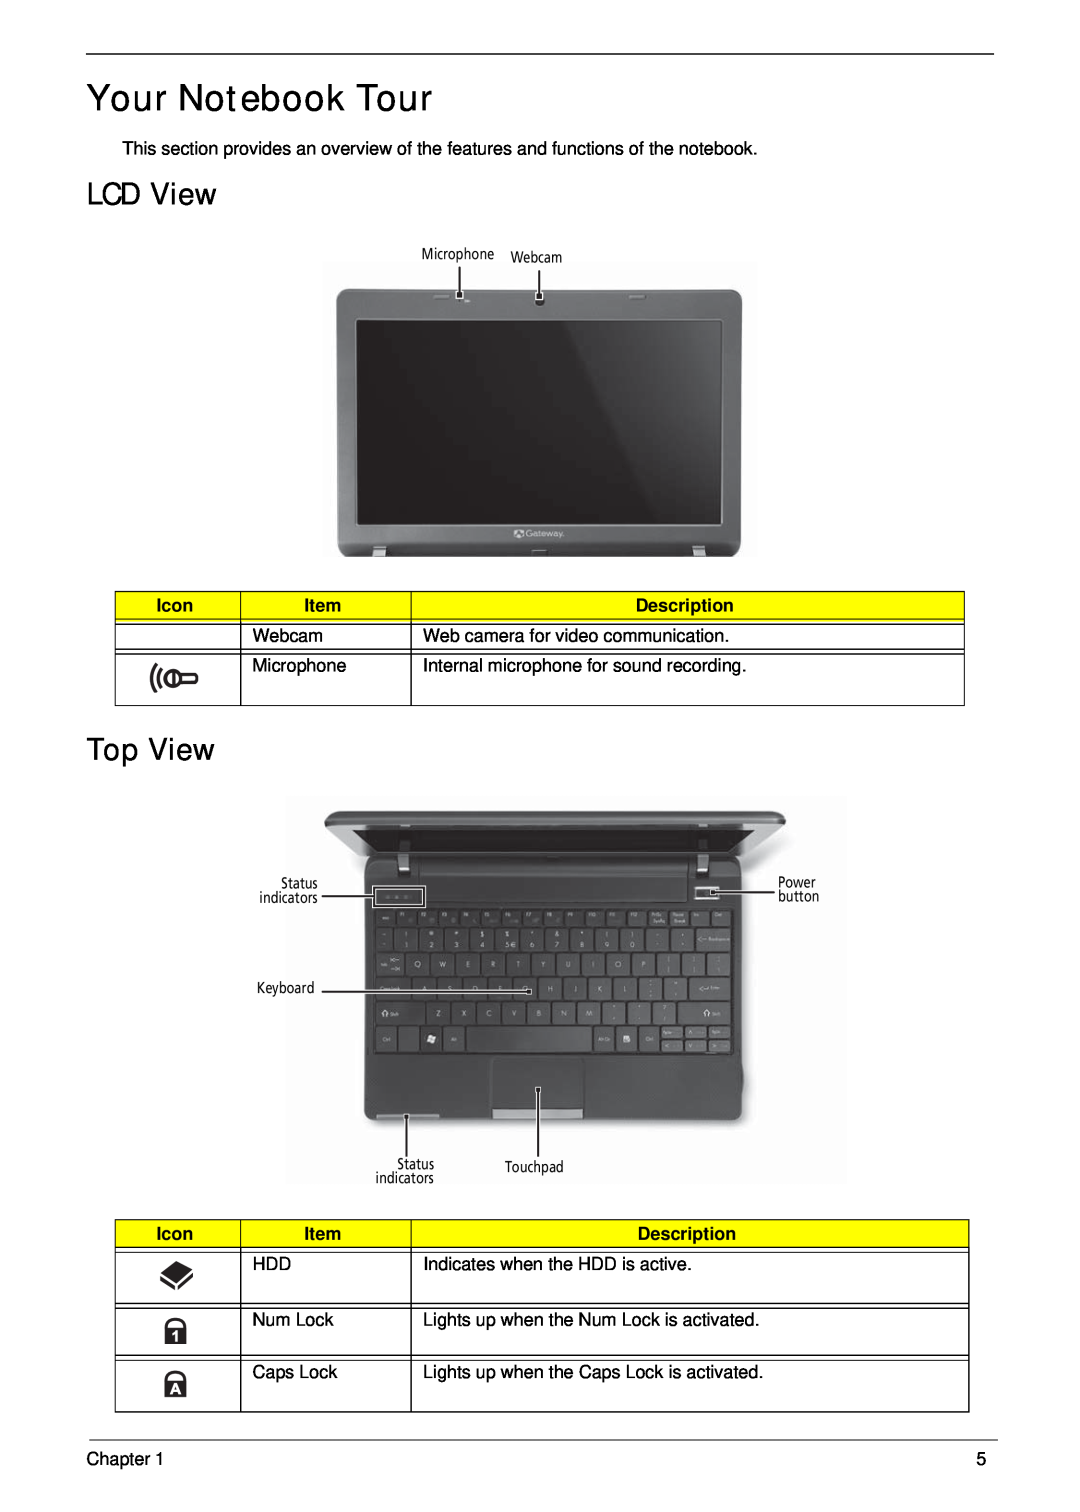 Gateway EC14 manual Your Notebook Tour, LCD View, Top View 